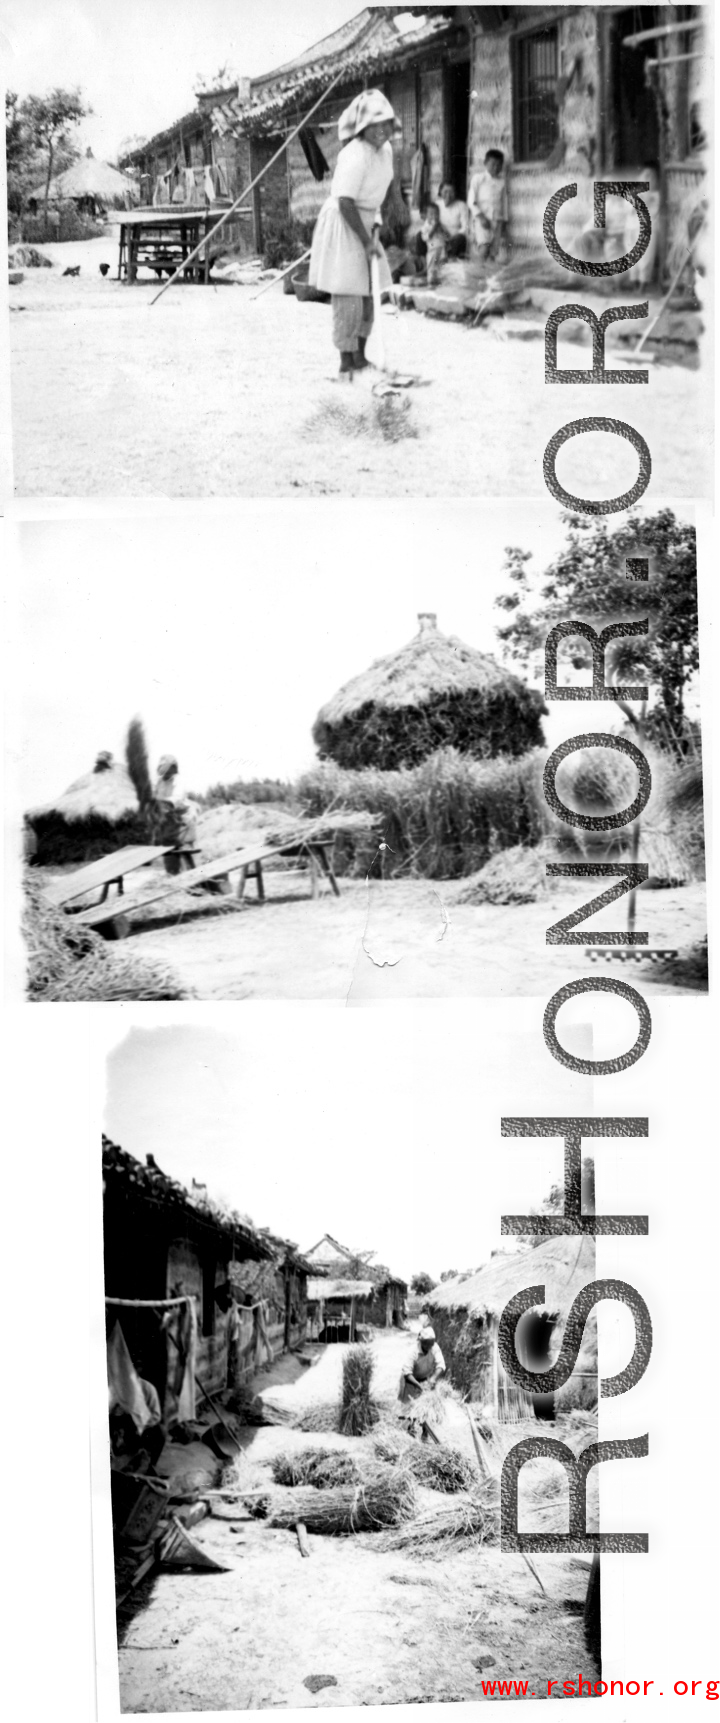 Scenes of rural life along the Burma Road during WWII.